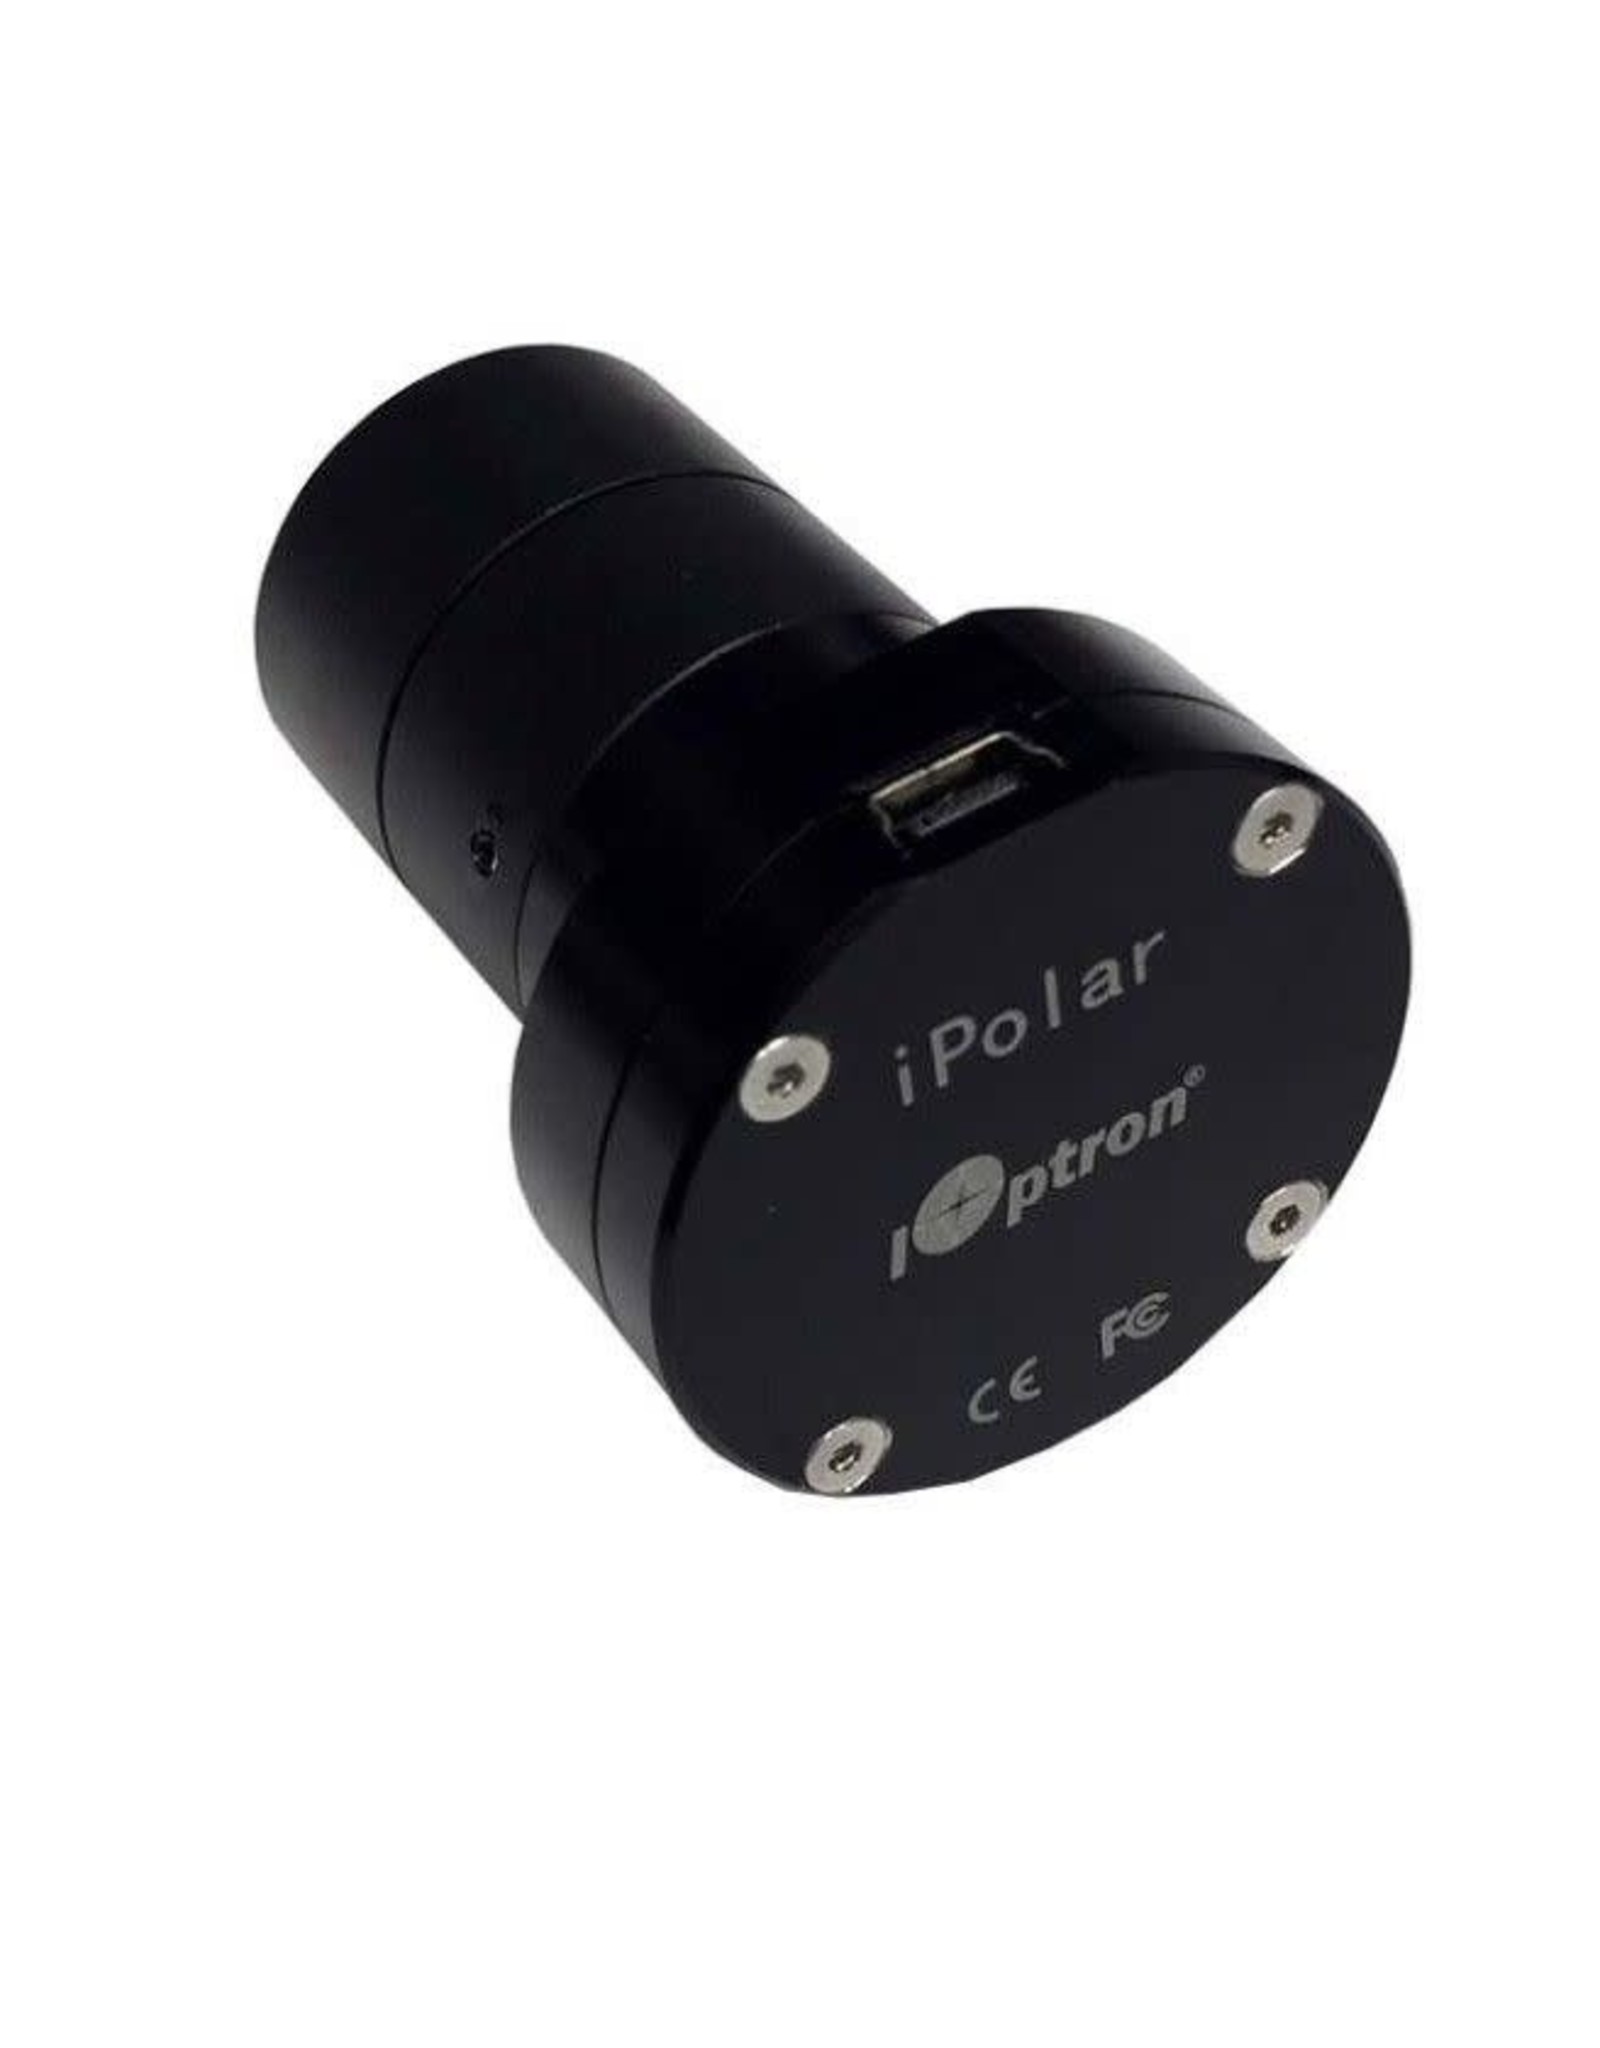 iOptron iOptron iPolar Electronic Polarscope with Adapter for External Mounting to CEM60 - 3339-060